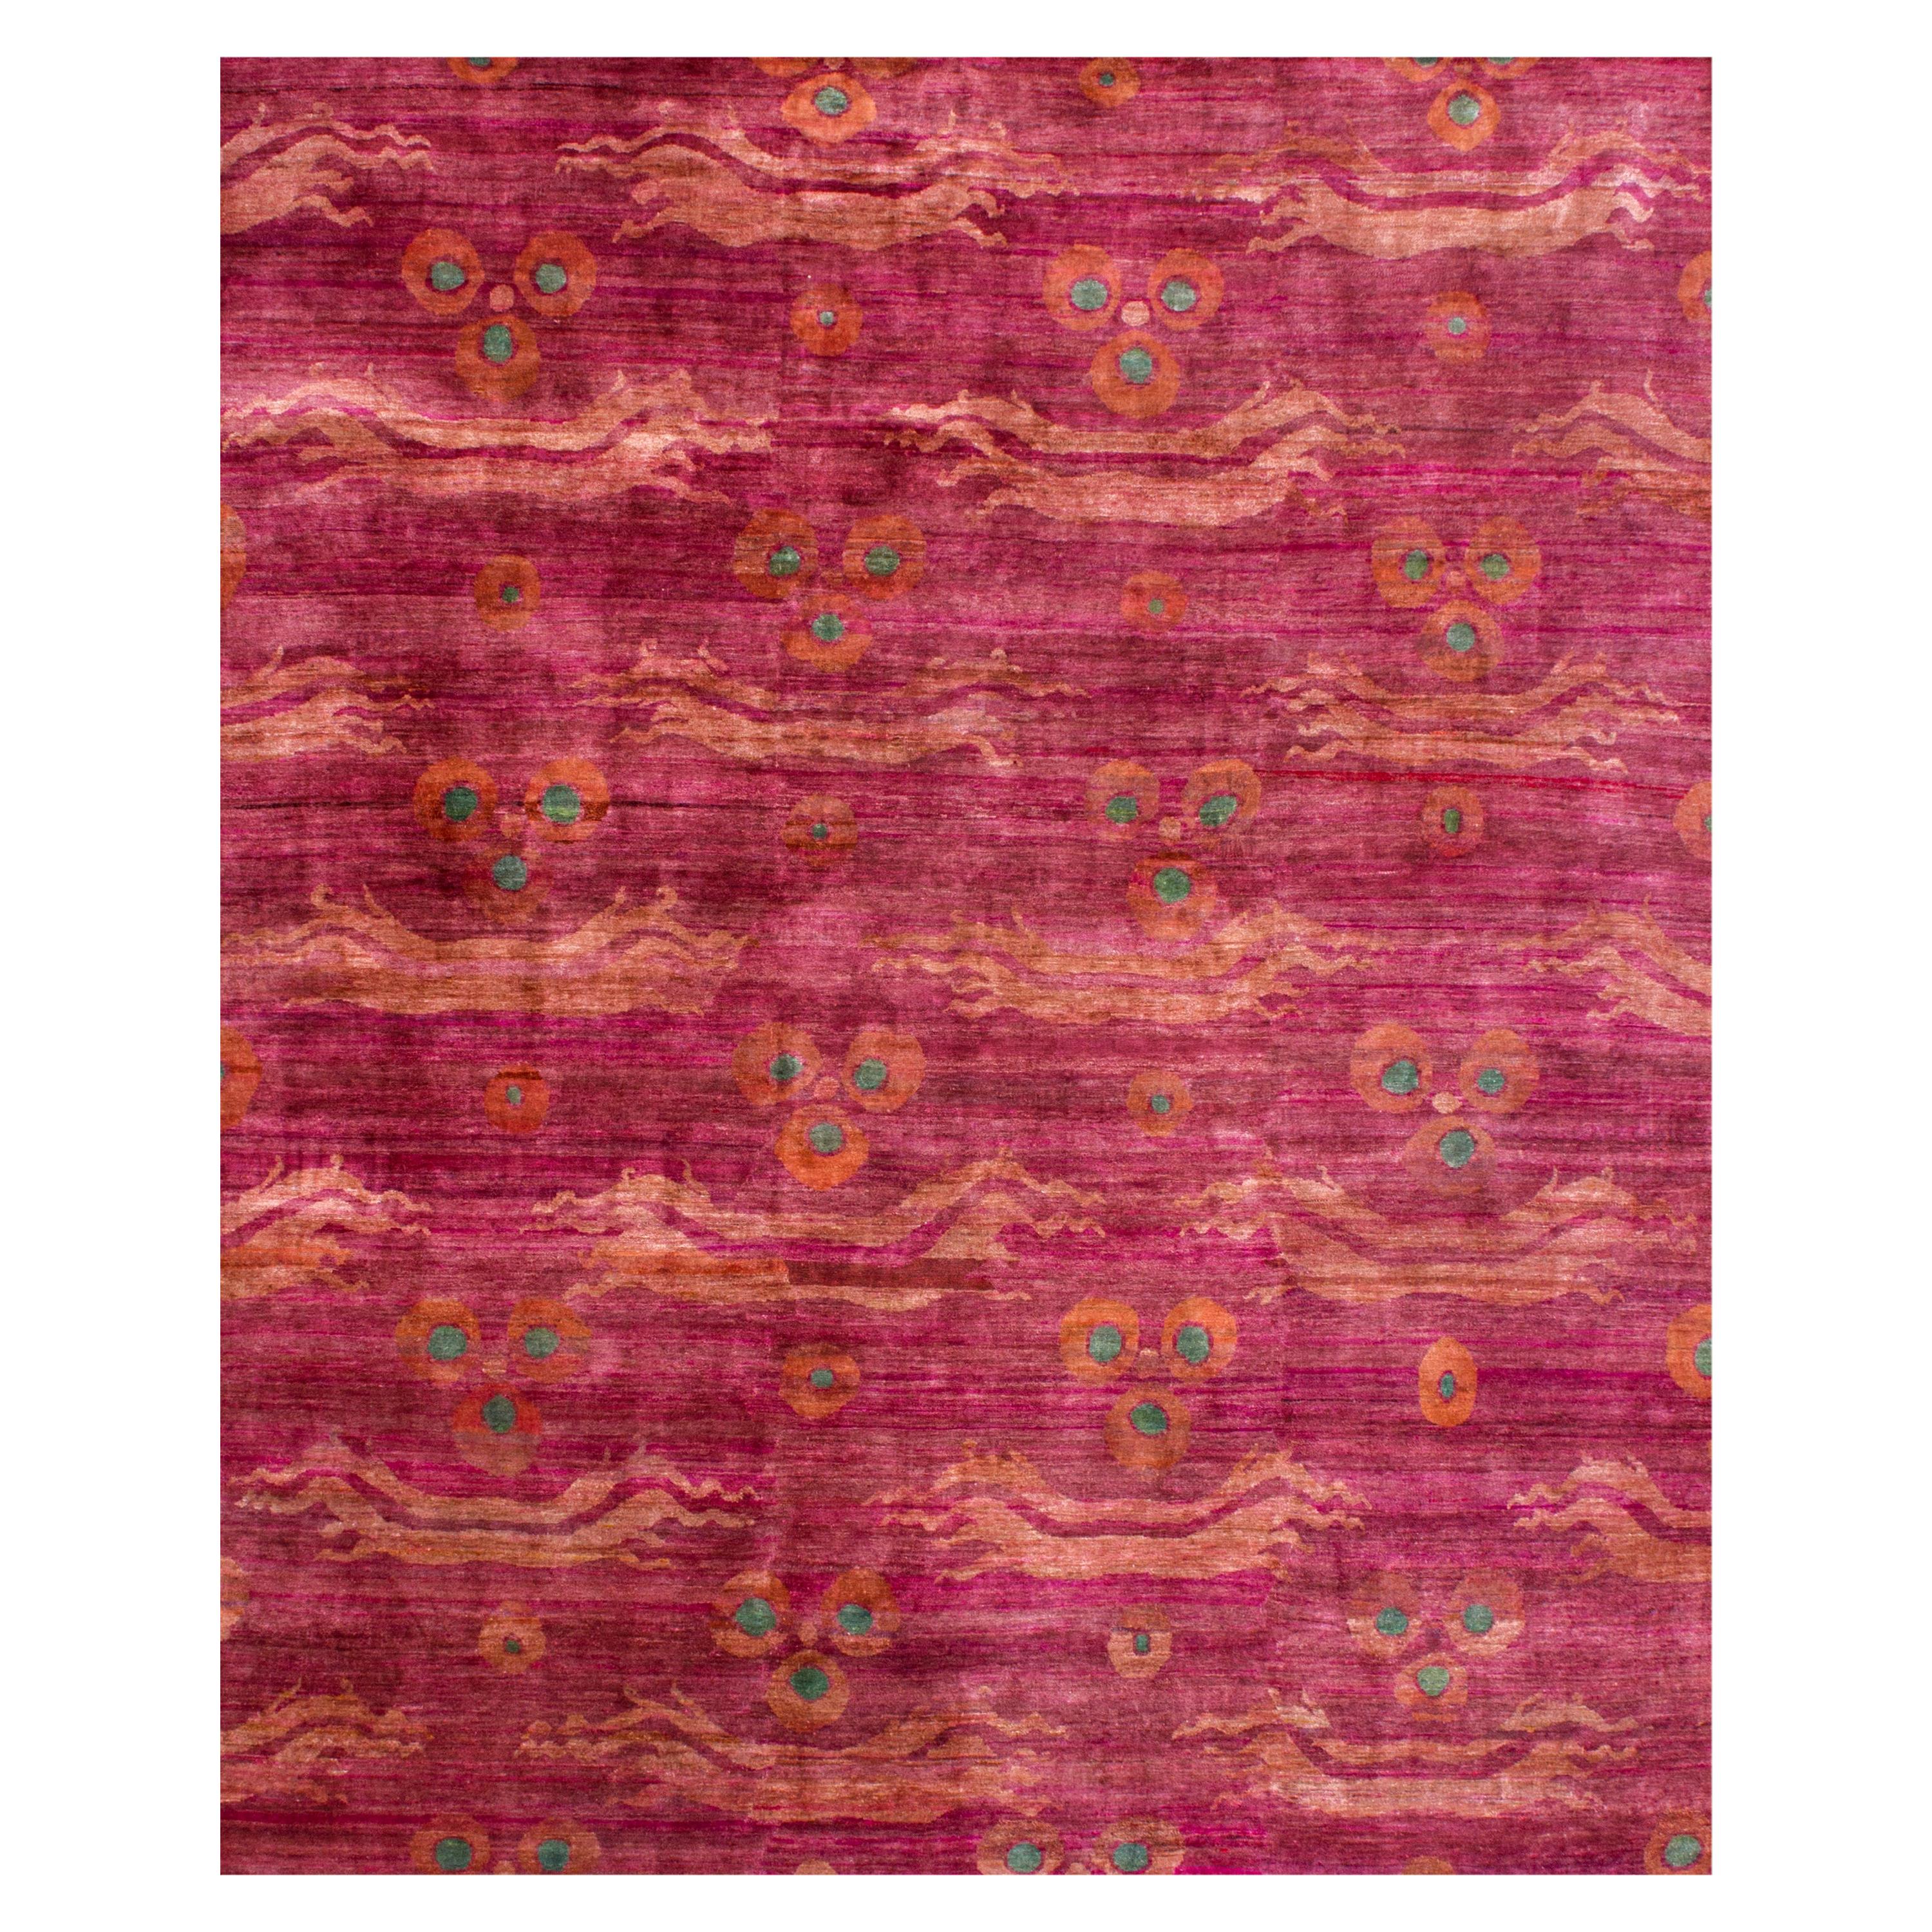 Custom Fuchsia Pink Dragon Hand-Knotted Wool and Natural Silk Rug